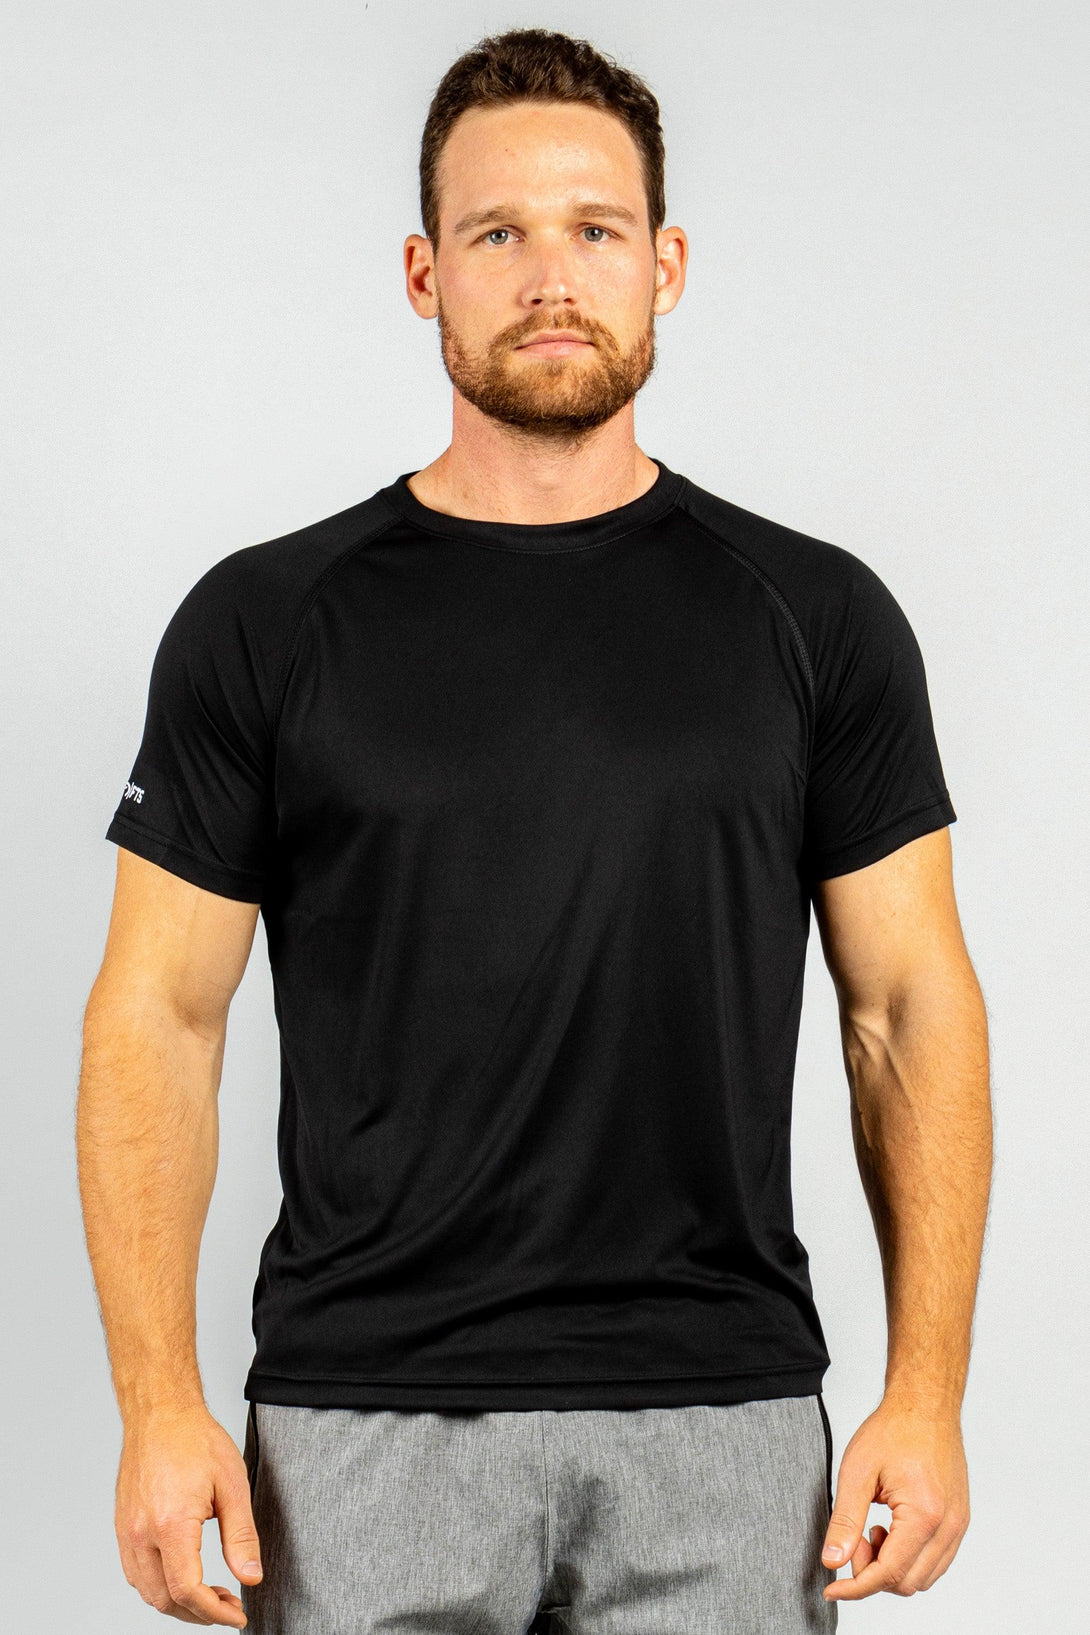 Performance T-Shirts | WHITE - NAVY - BLACK Pack of 3 - FTS